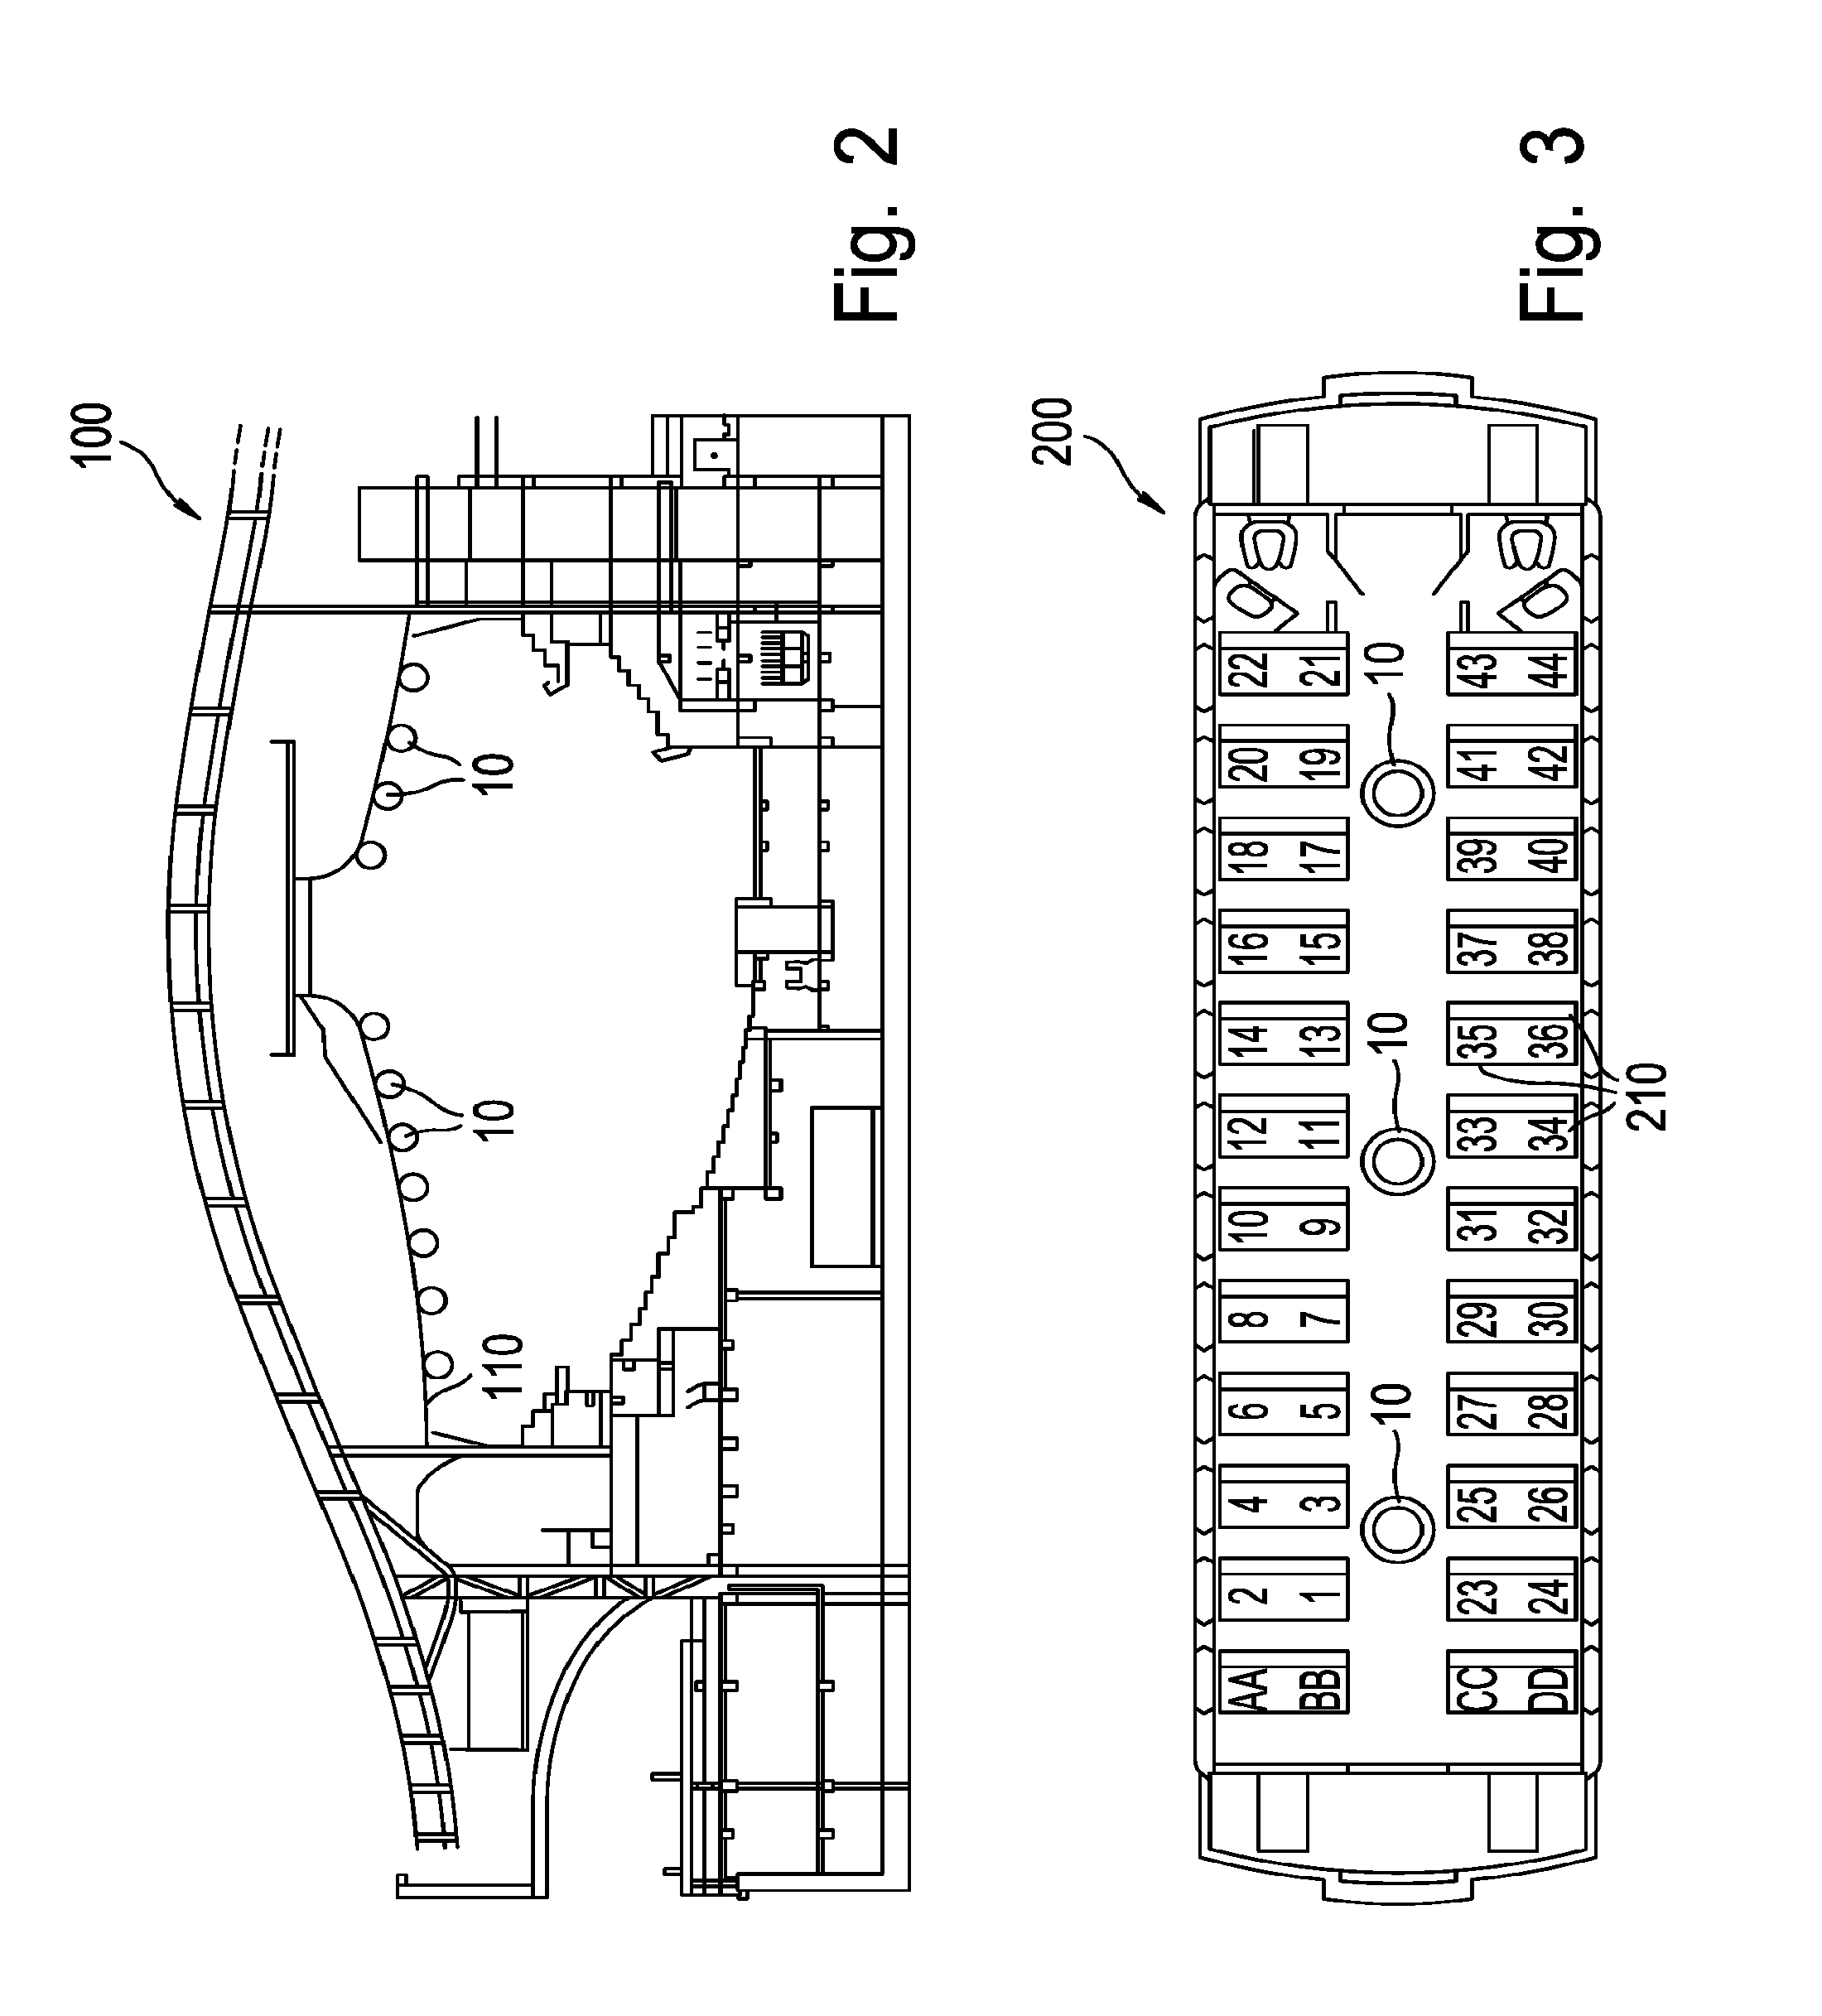 Detection device, system and method for detecting the presence of a living being